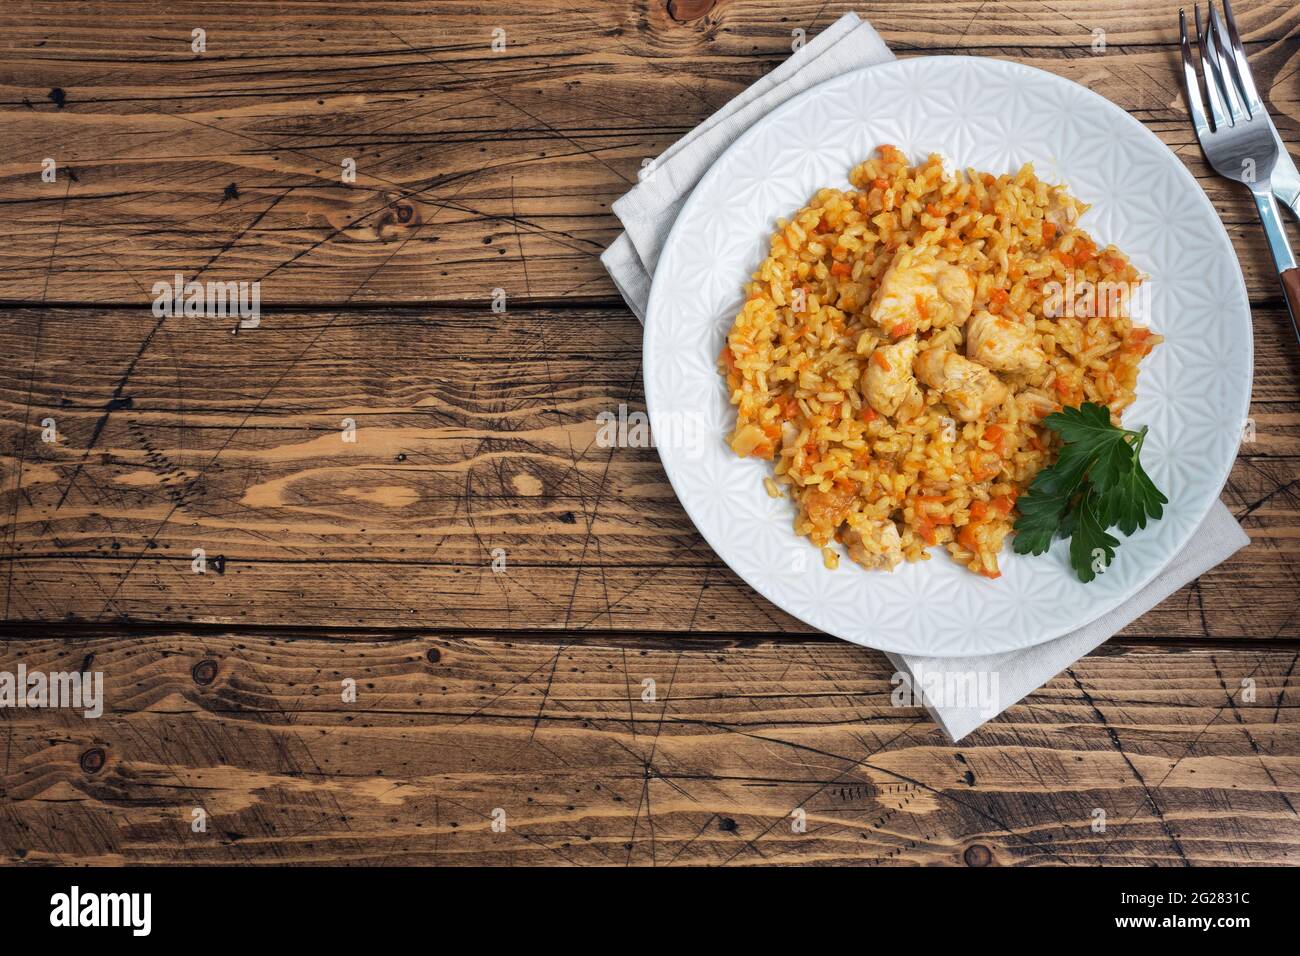 Delicious Asian pilaf, stewed rice with vegetables and chicken on a plate. Wooden rustic background copy space. Stock Photo